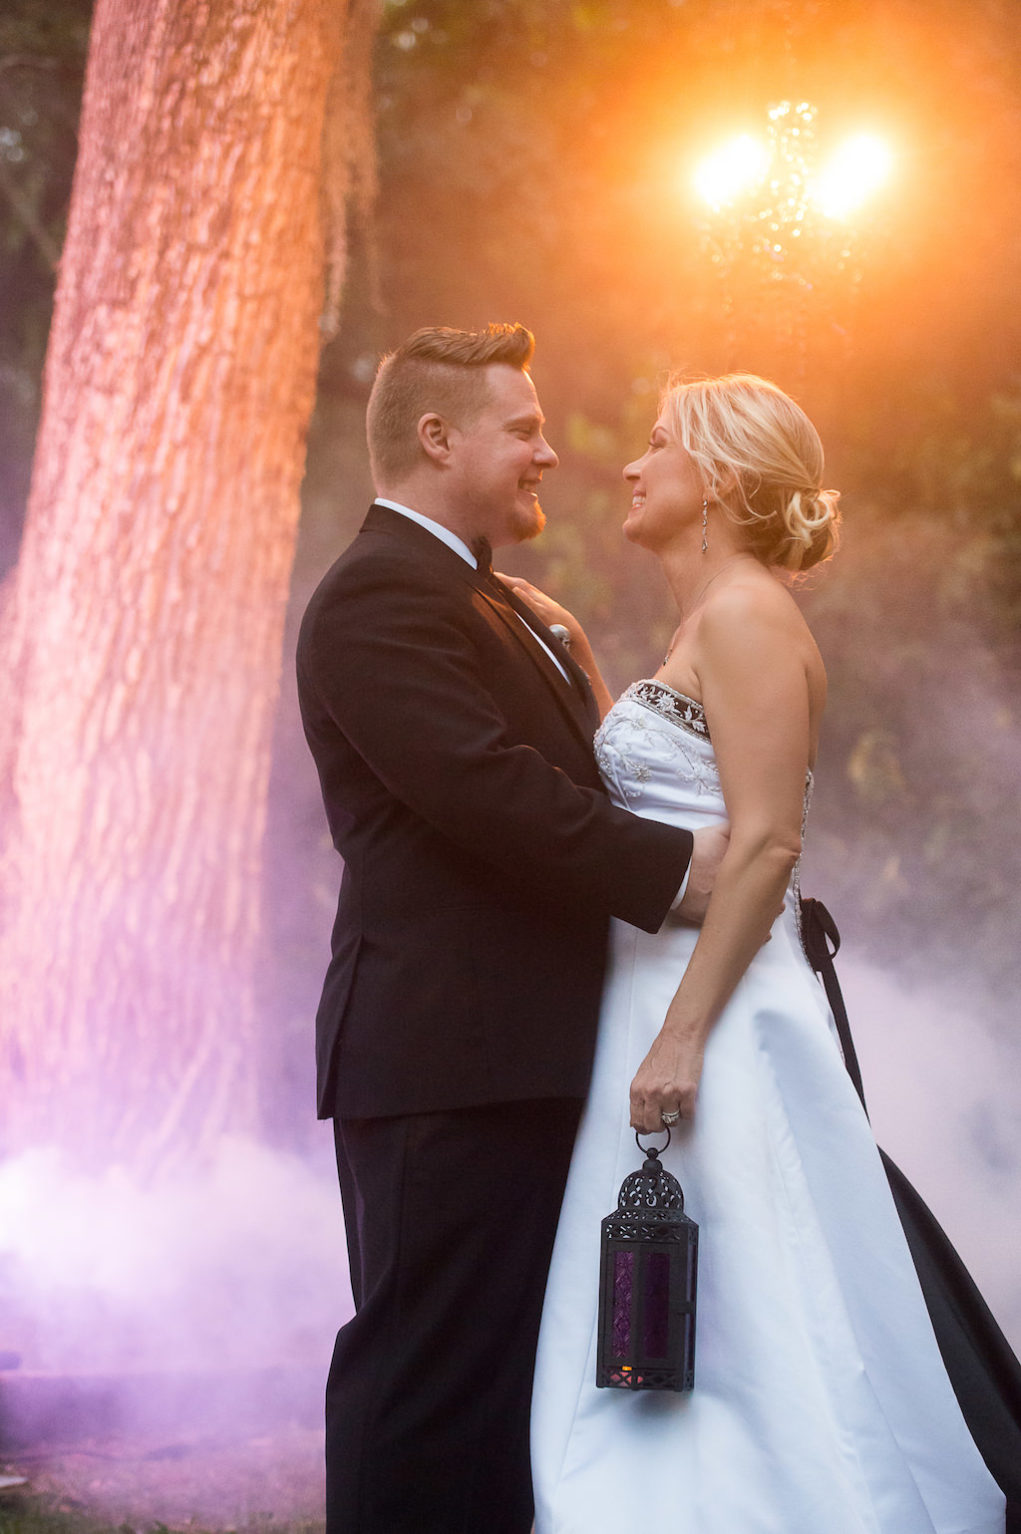 Theatrical Outdoor Wedding Portrait with Black and White Strapless Wedding Dress and Fog | Sarasota Halloween Themed Wedding Smoke Fog by Nature Coast Entertainment Services